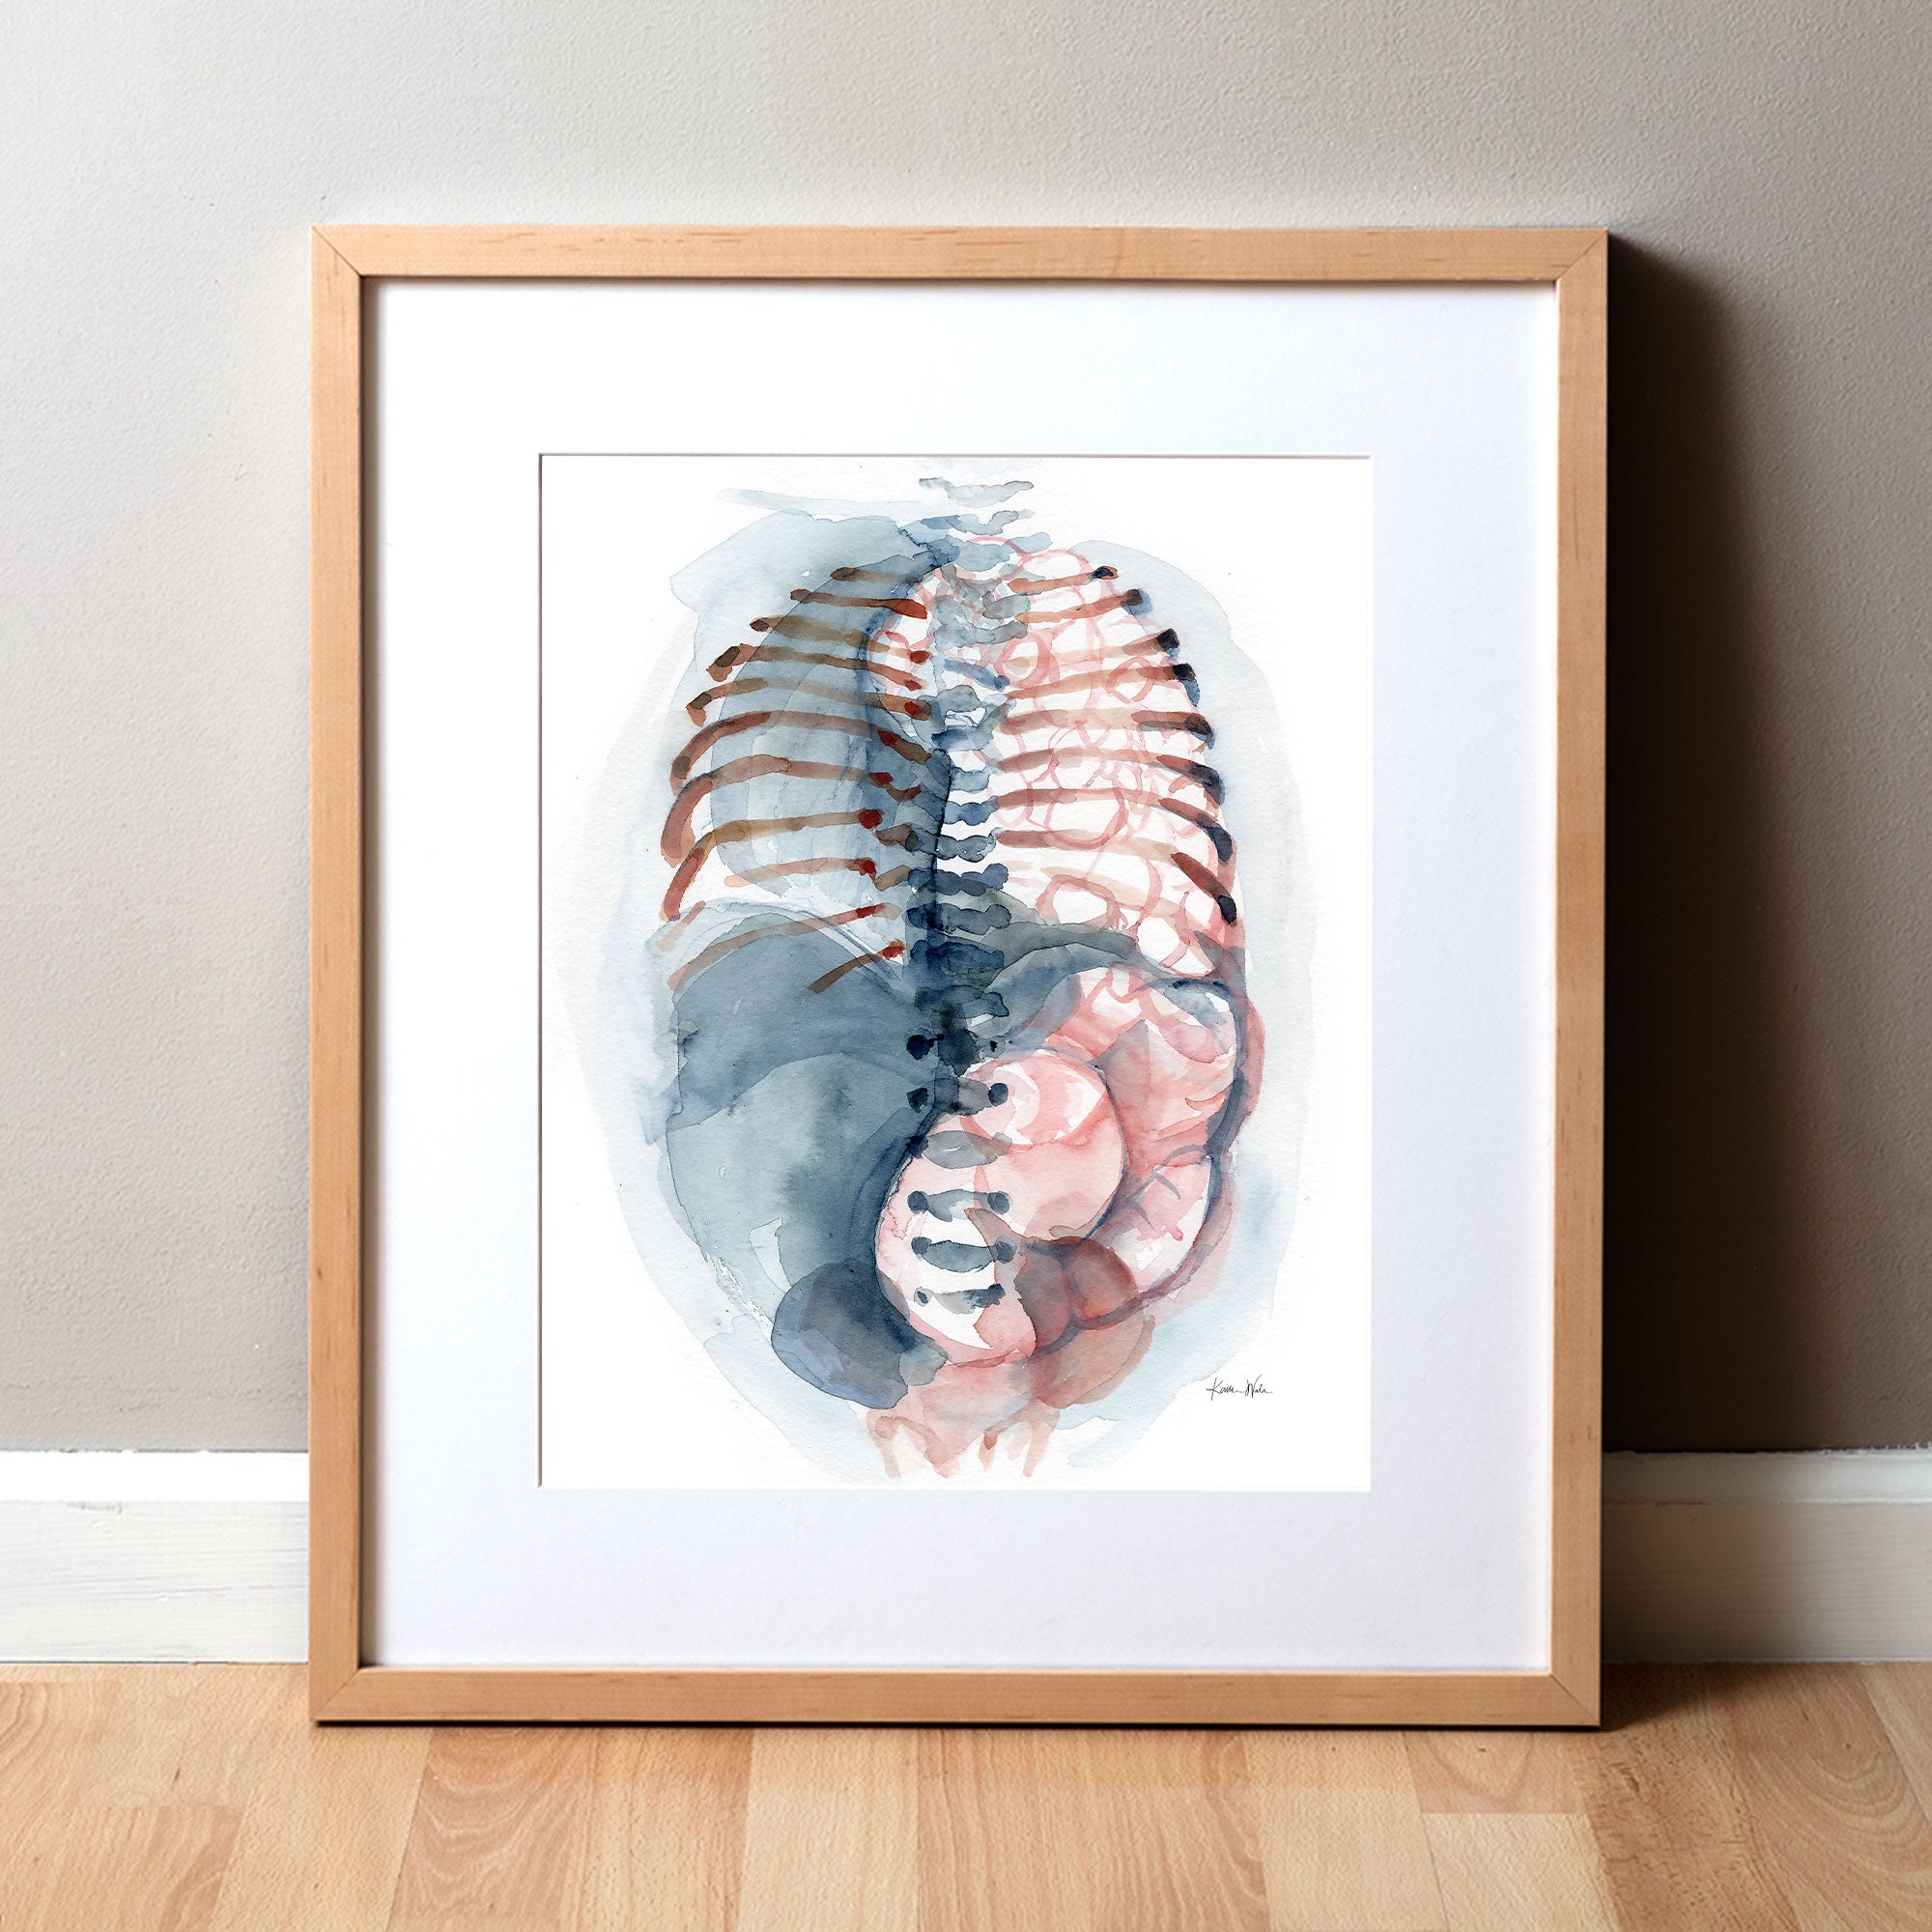 Framed watercolor painting of a diaphragmatic hernia.